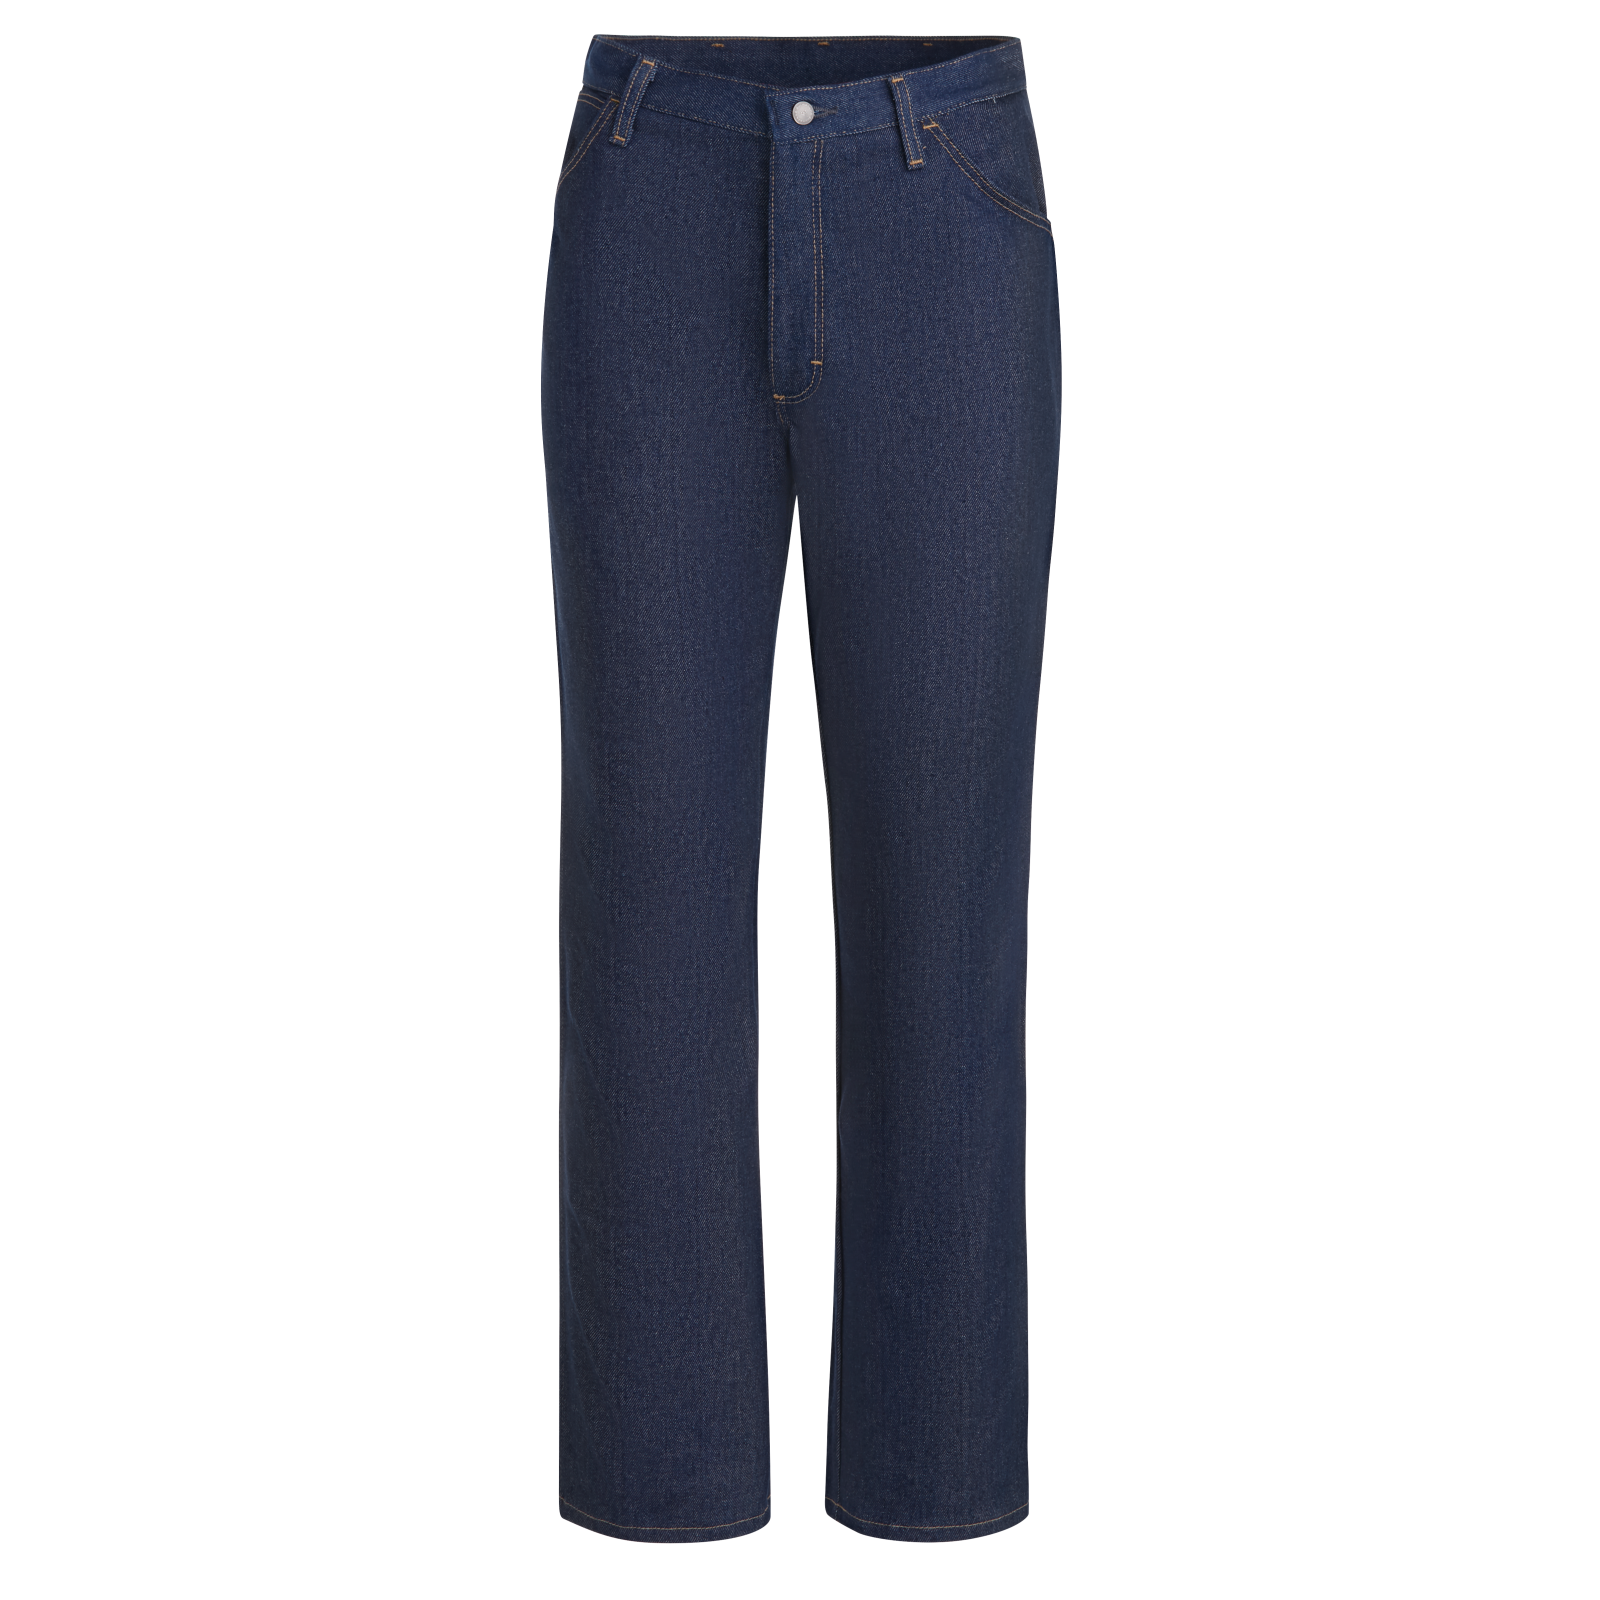 Men's Relaxed Excel FR Jean